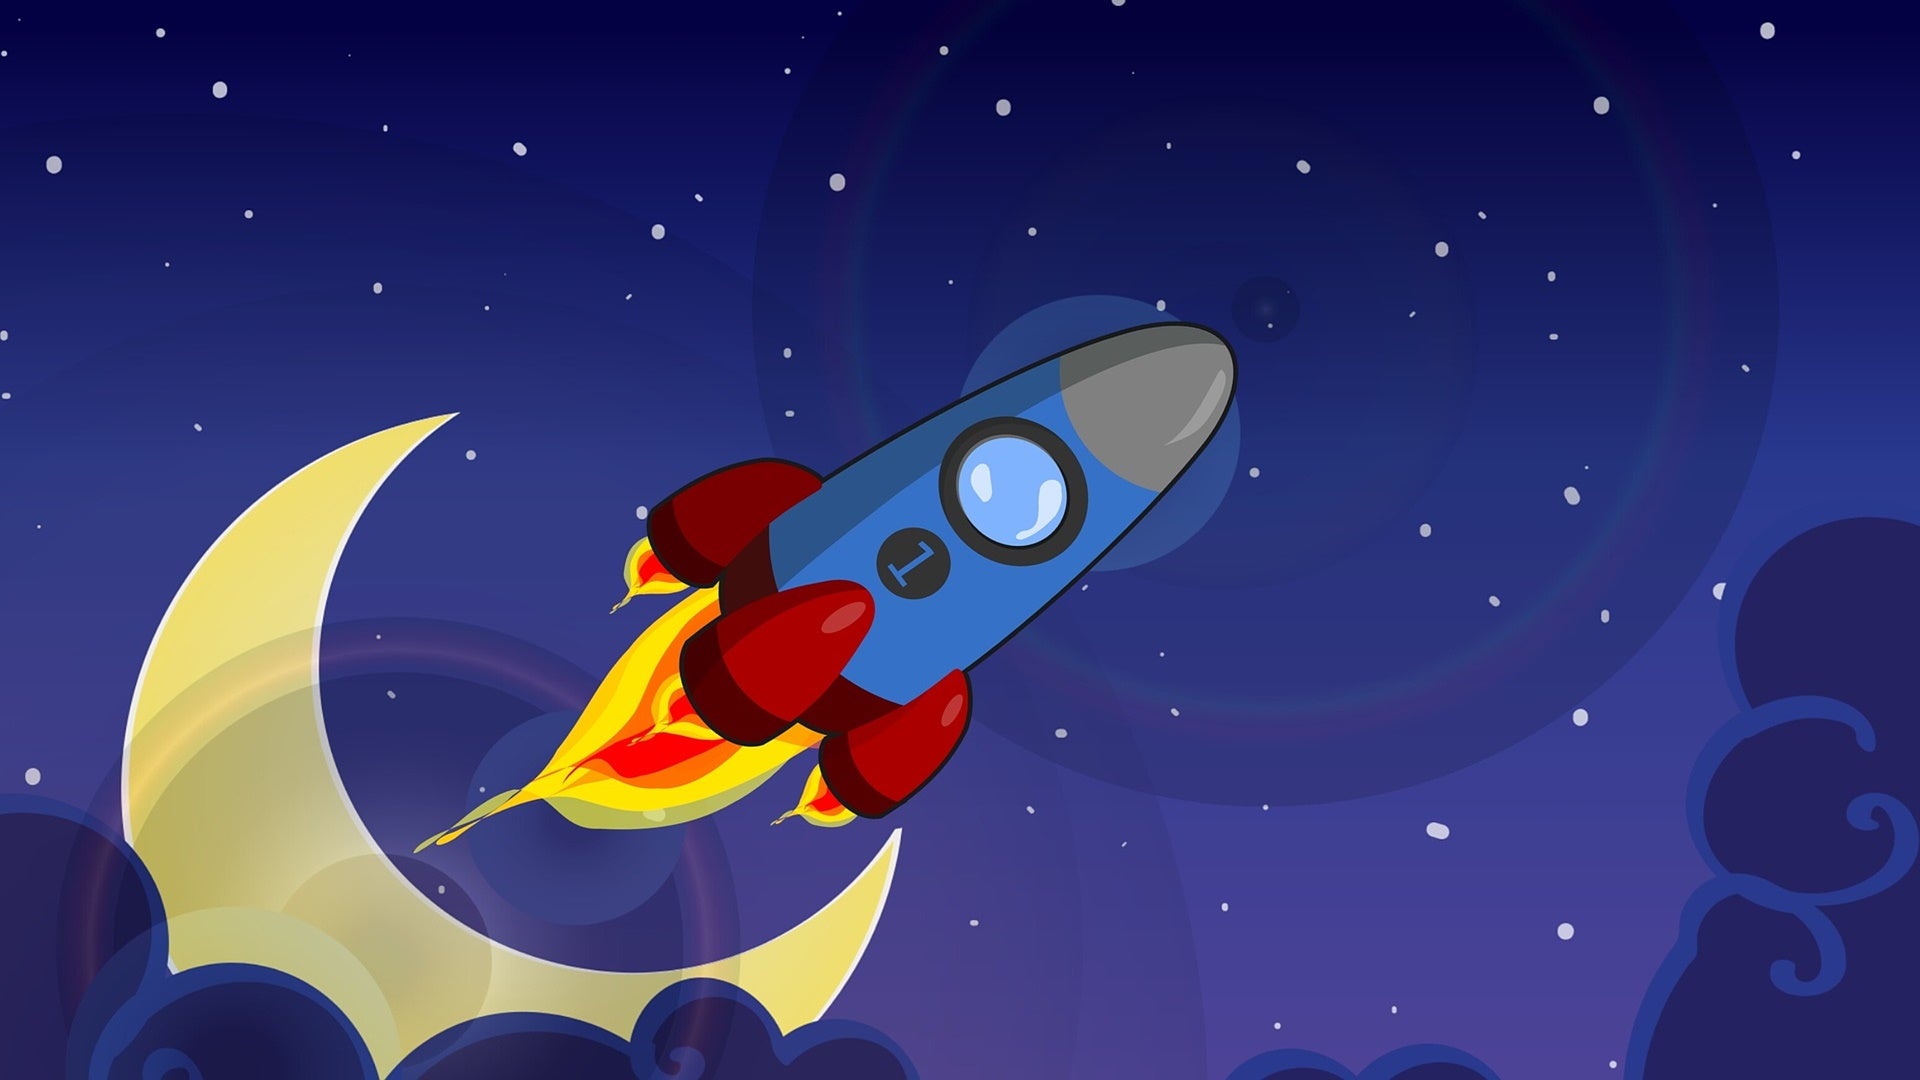 startup rocket in front of moon